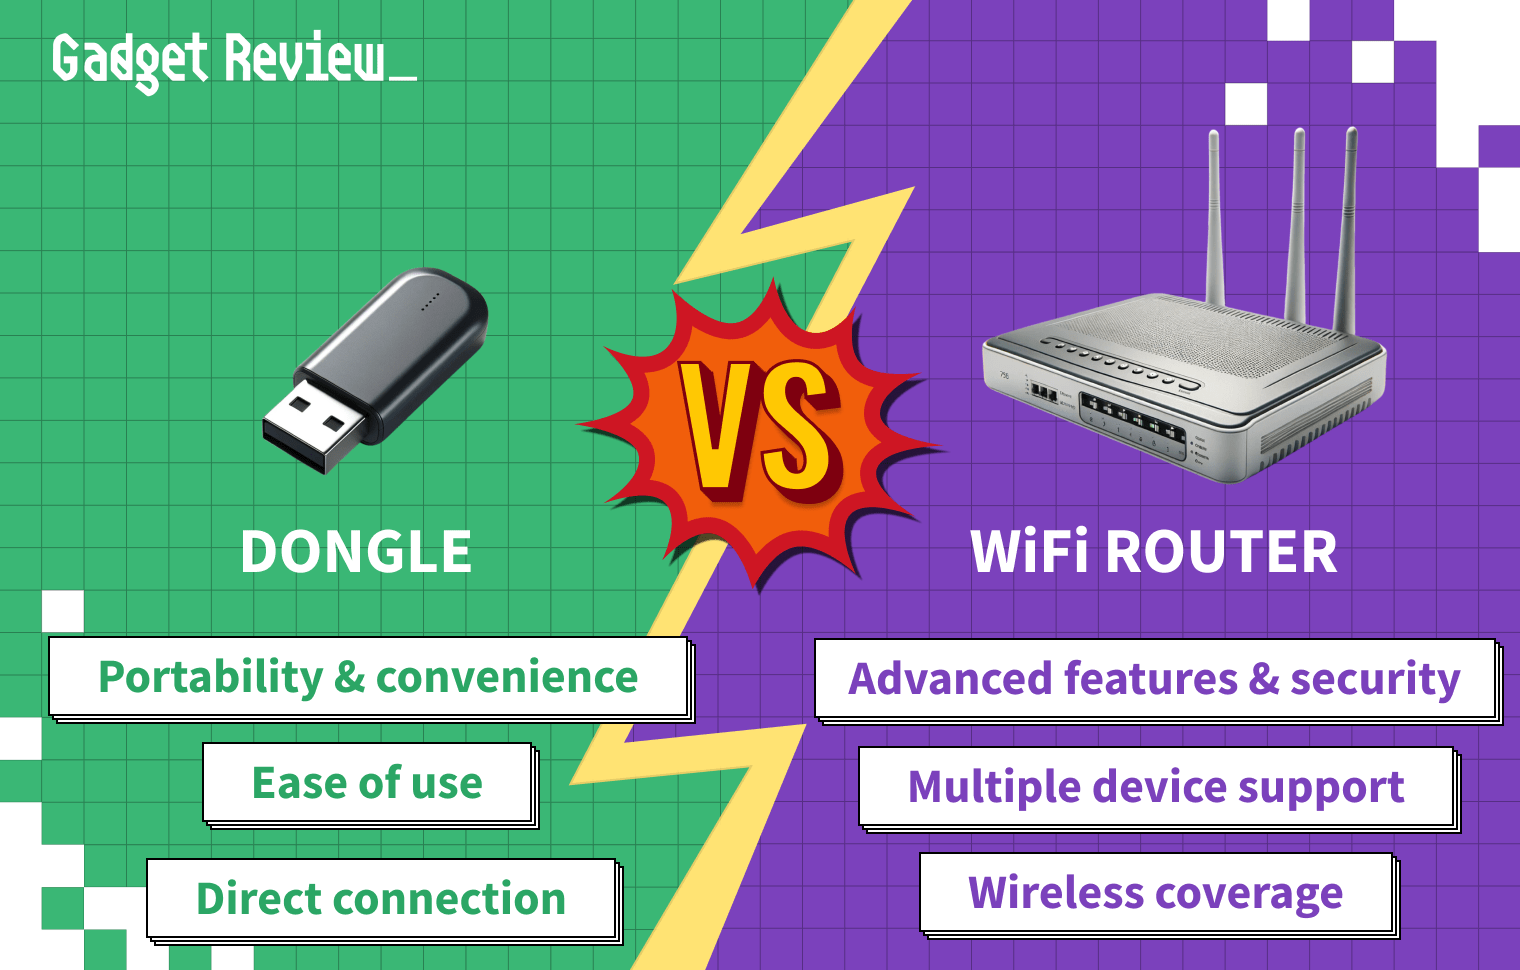 Dongle vs Wi-Fi Router